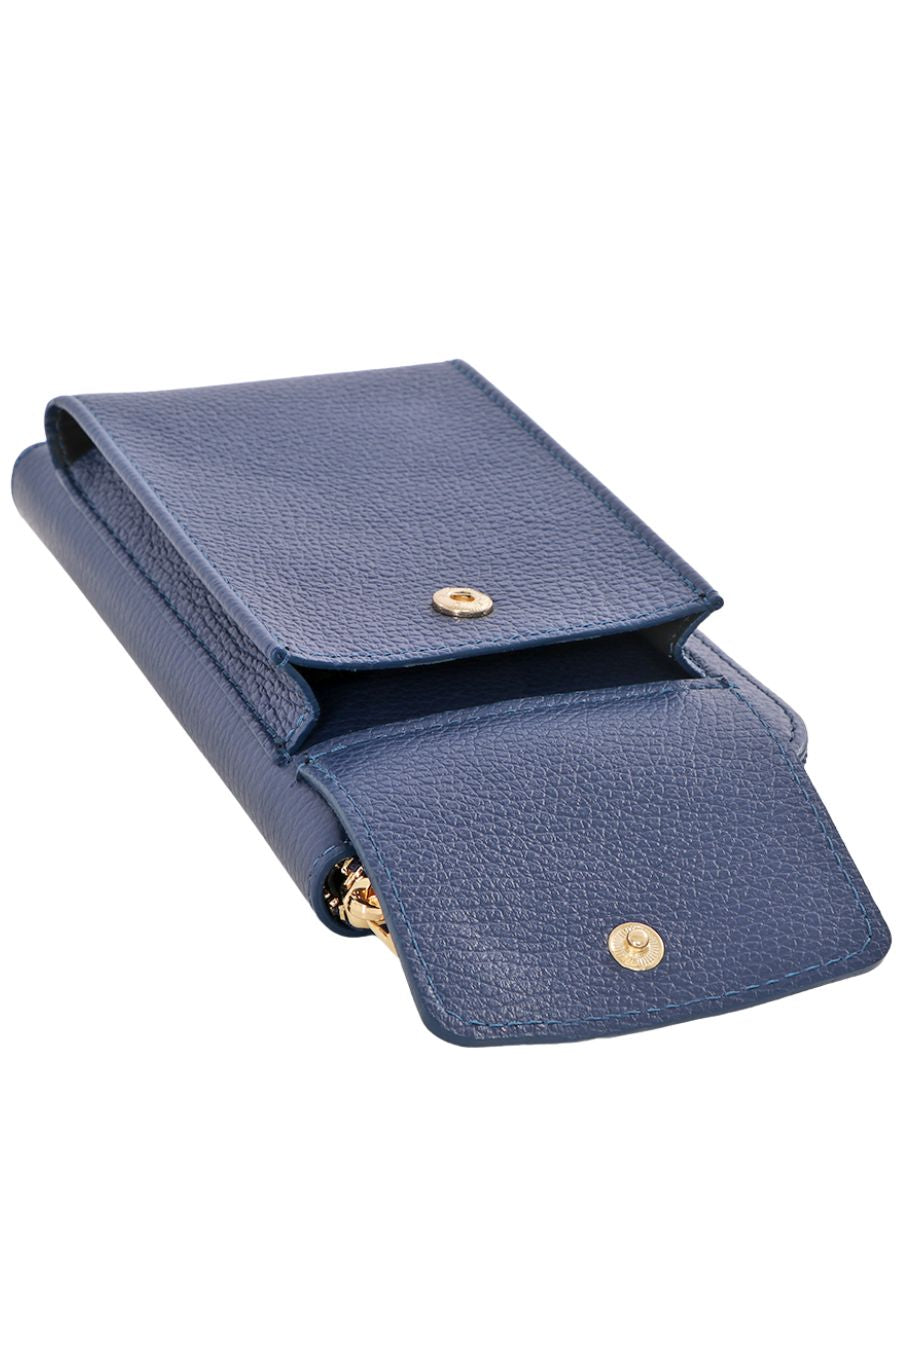 Navy Blue Genuine Italian Leather Mobile Phone Wallet Combo Bag